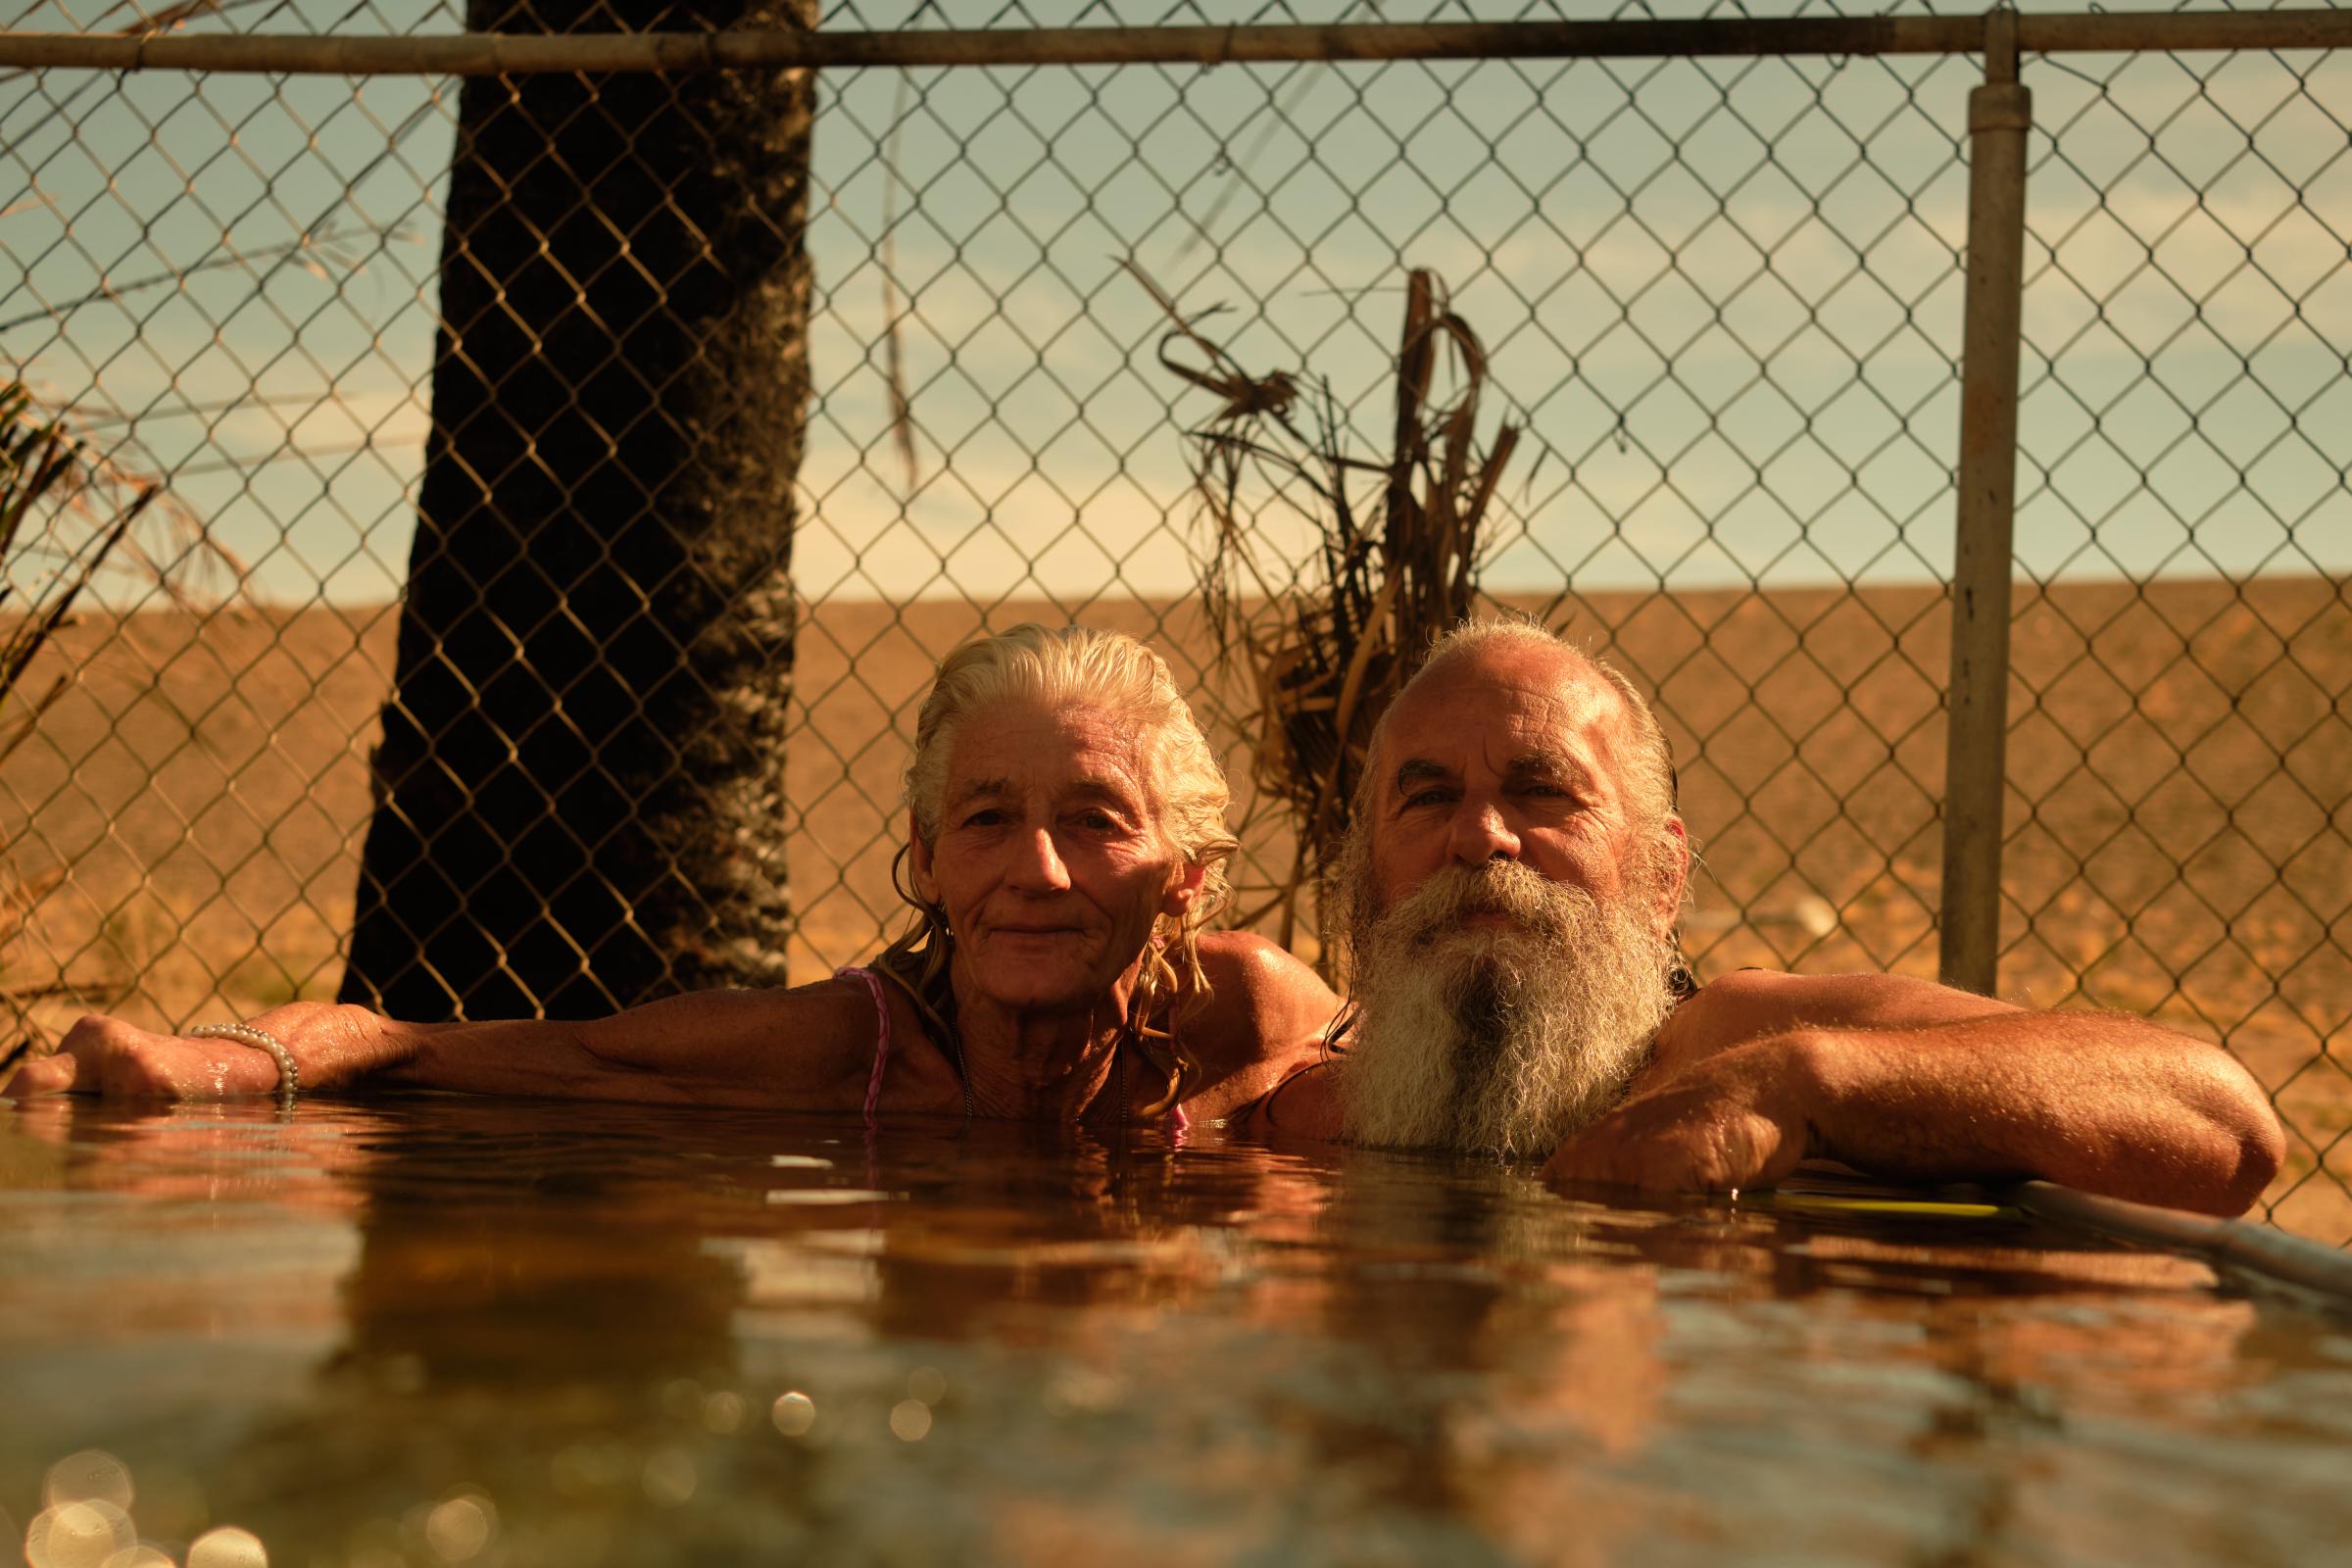 A Warm Winter (Ongoing)  - Darleen and David at the Hot Springs. Holtville, California